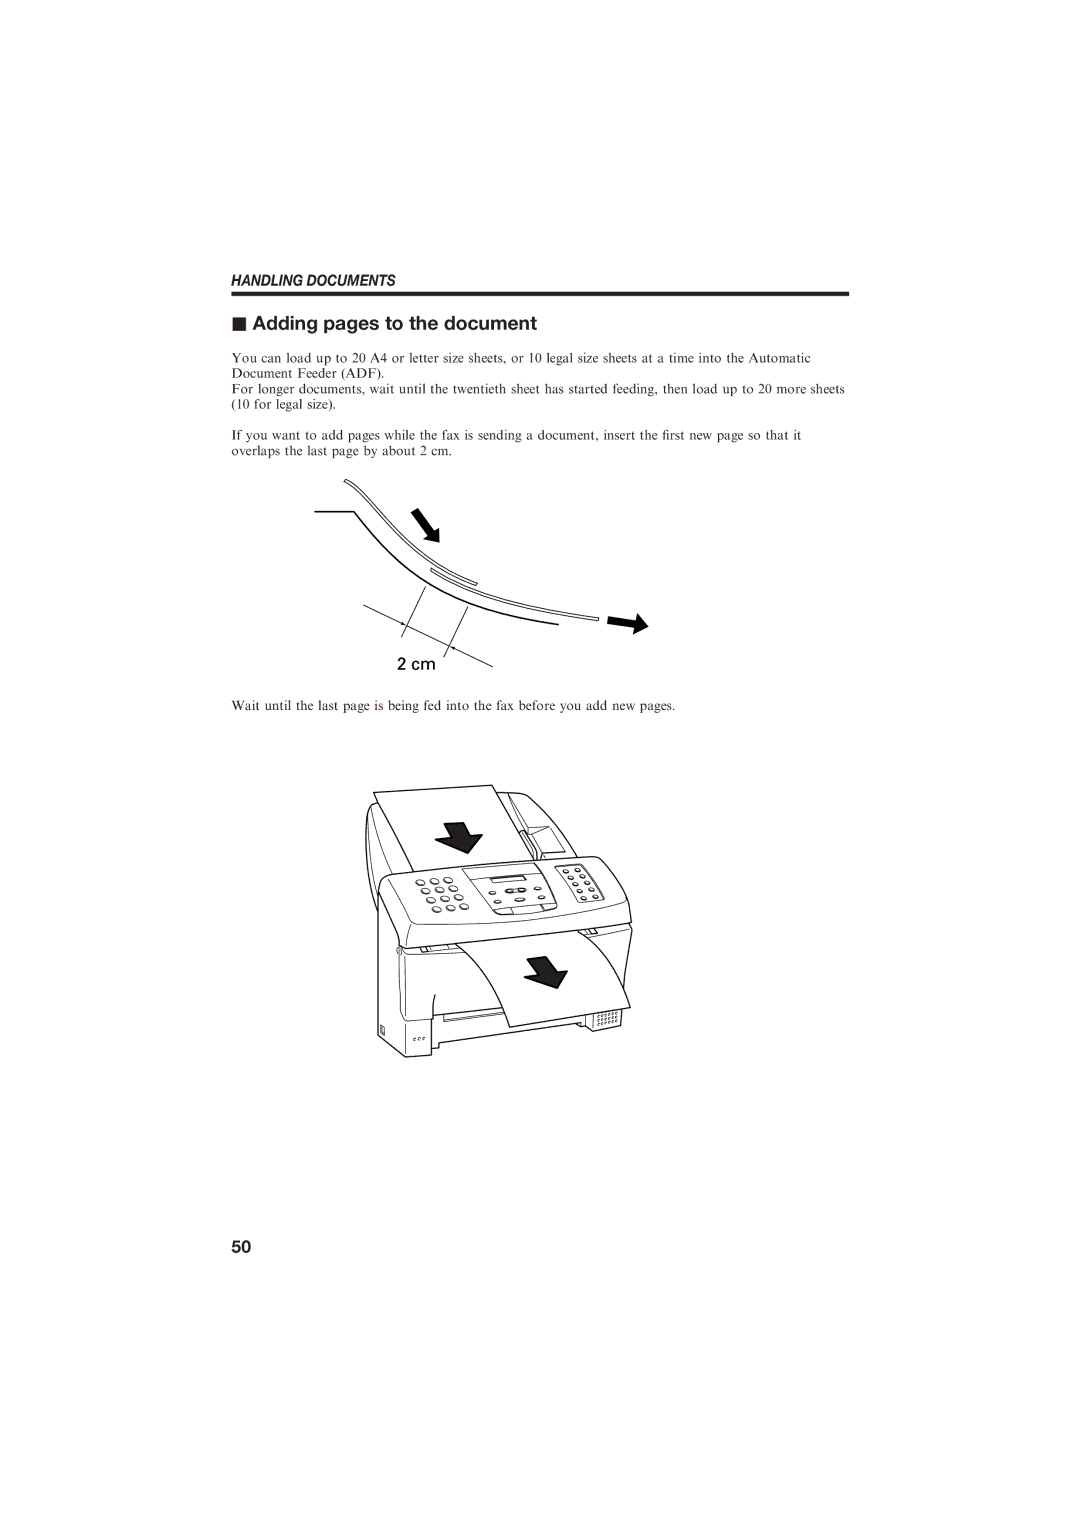 Canon B155 manual Adding pages to the document, Handling Documents 